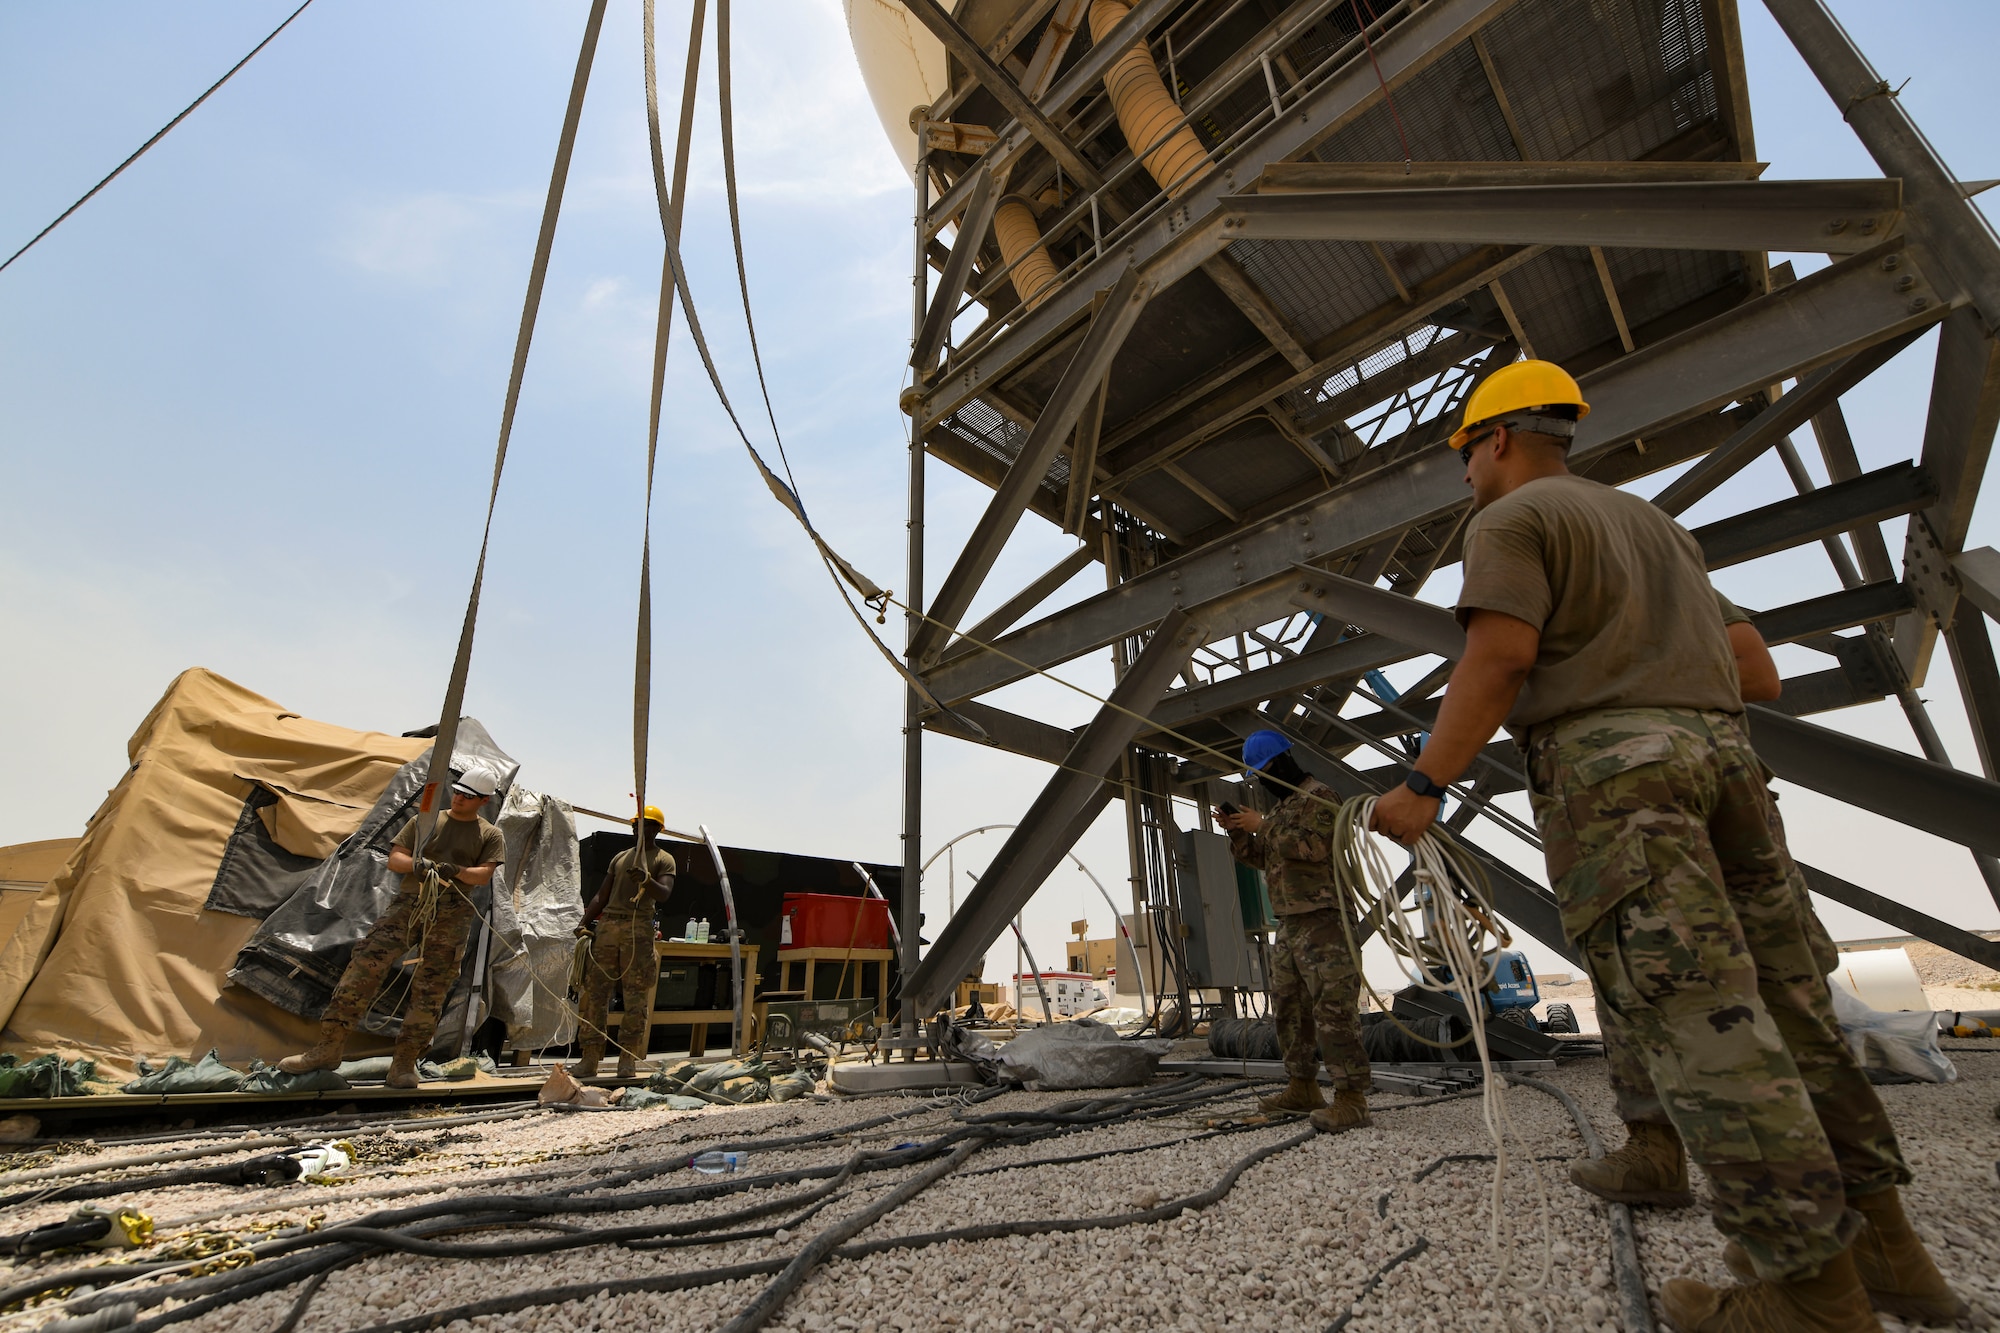 A U.S. Air Force Airman from the 727th Expeditionary Air Control Squadron, Detachment 3, holds a rope to help secure a replacement AN/TPS-75 radar system as it’s lowered into place as part of regular maintenance July 27, 2021, at Al Udeid Air Base, Qatar. 727th EACS radar technicians perform several hours of maintenance and calibration daily to ensure radar systems perform at optimal levels. (U.S. Air Force by Staff Sgt. Alexandria Lee)